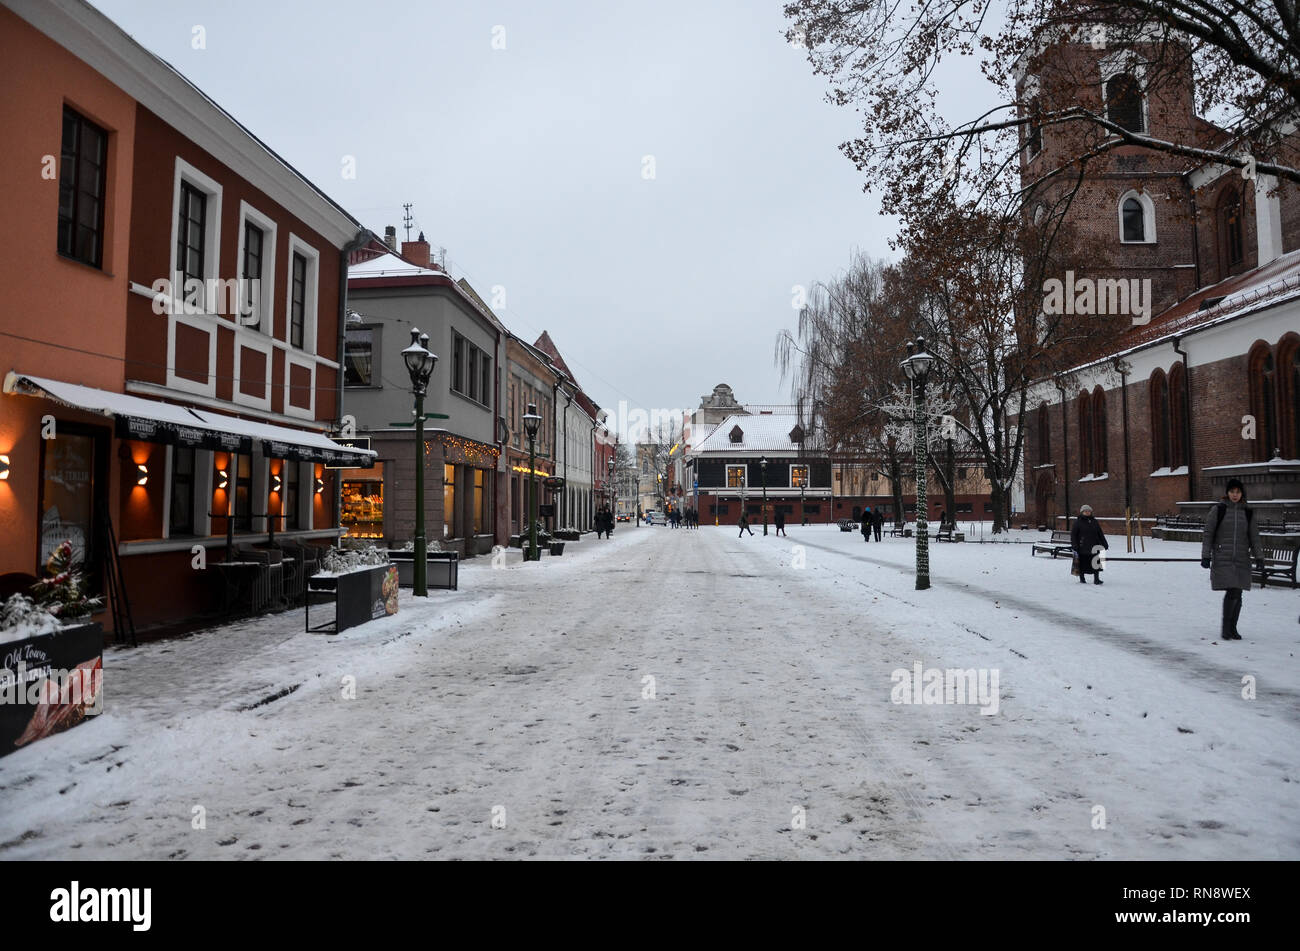 Vilniaus street, with Kaunas Cathedral Basilica to the right, Old Town, central Kaunas, Lithuania, December 2018 Stock Photo